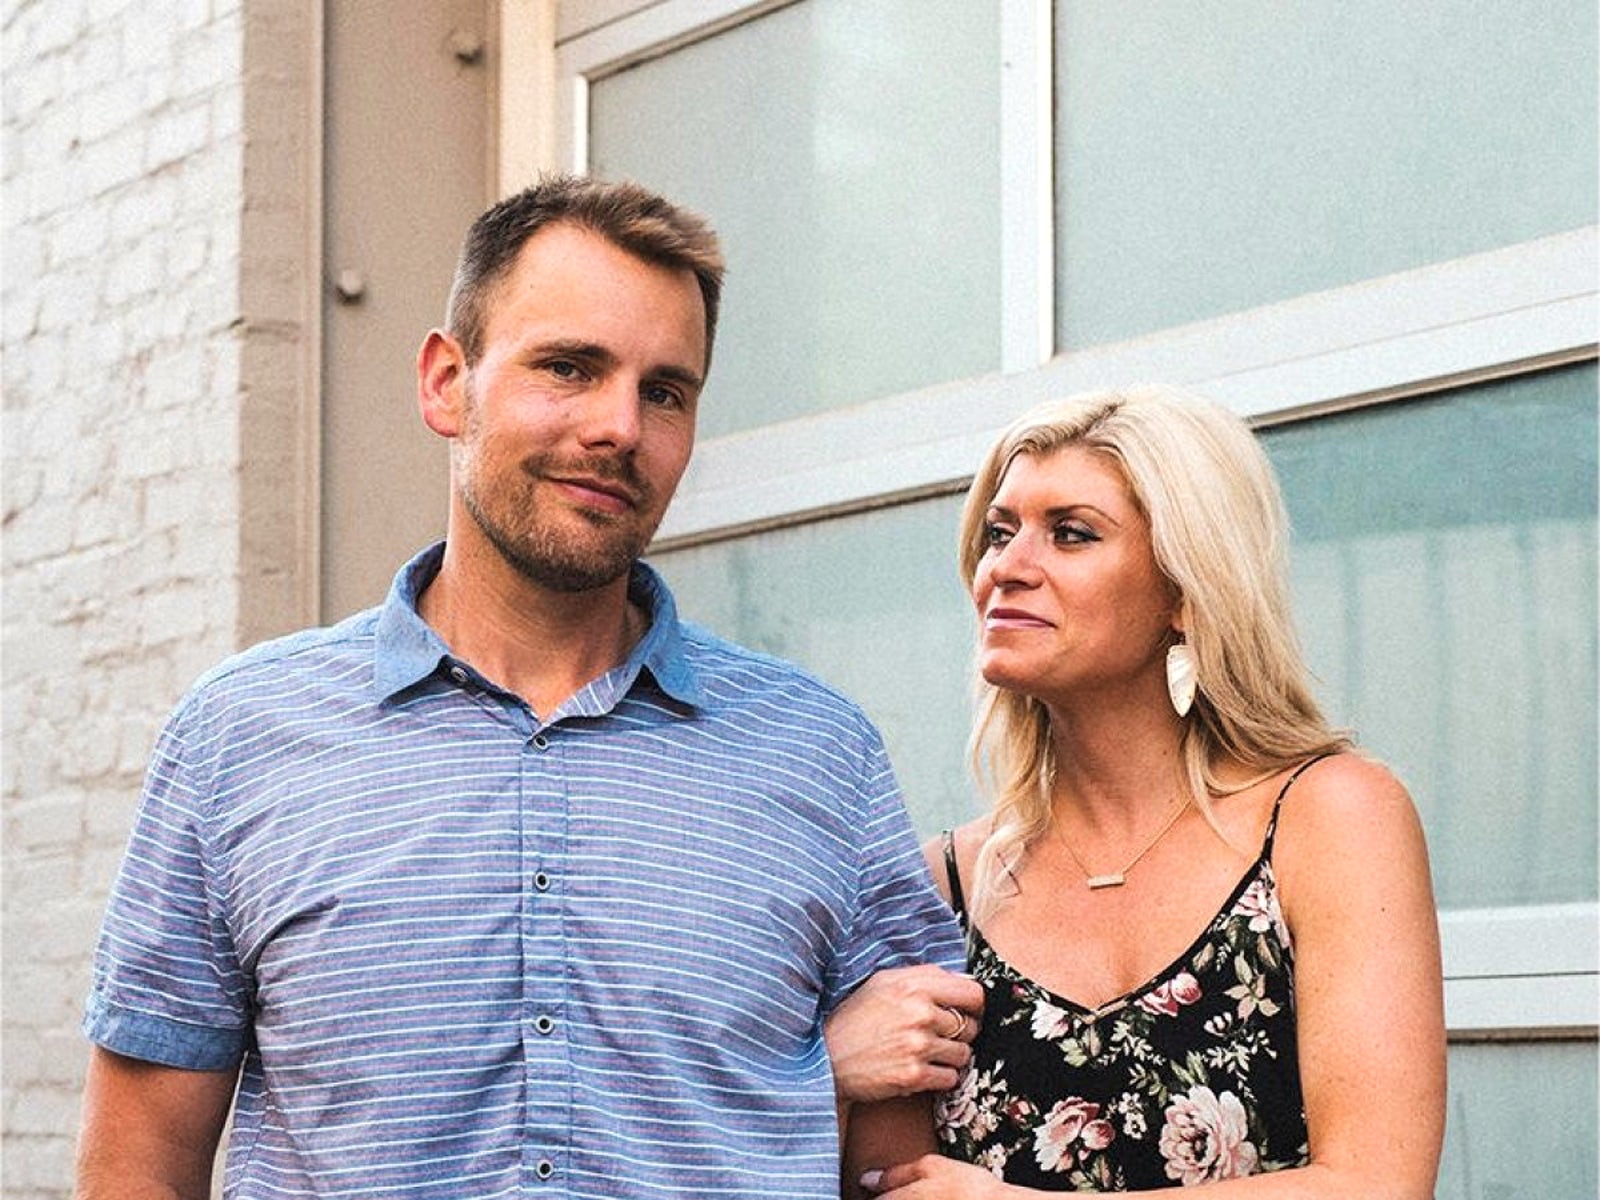 'Married at First Sight' recap: Dave Flaherty and Amber Martorana hit ...